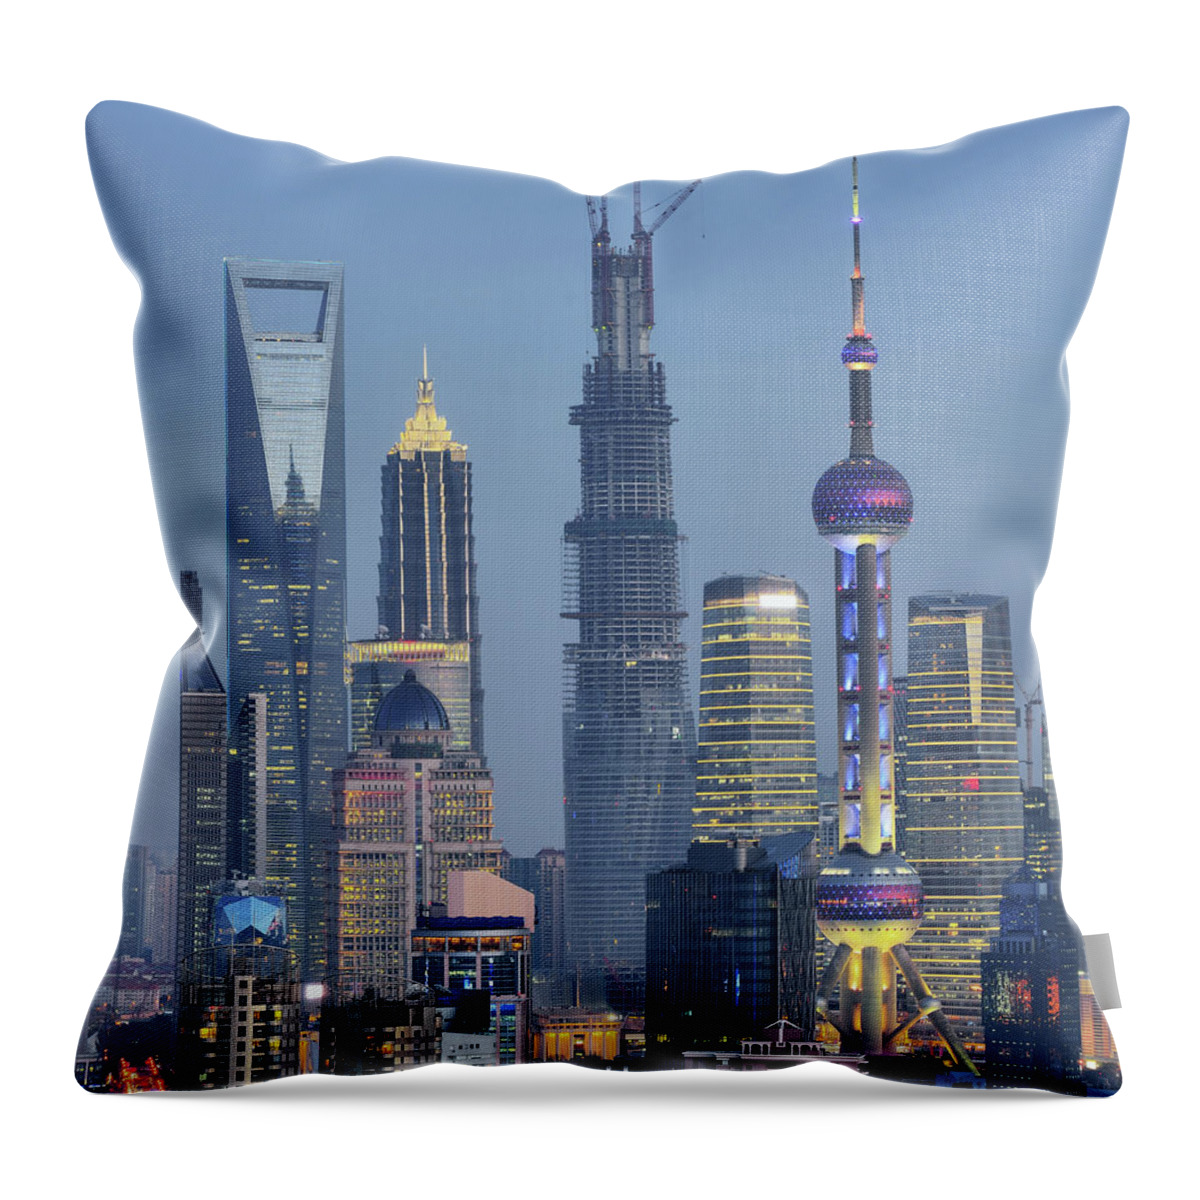 Built Structure Throw Pillow featuring the photograph Skyscraper City by Wei Fang